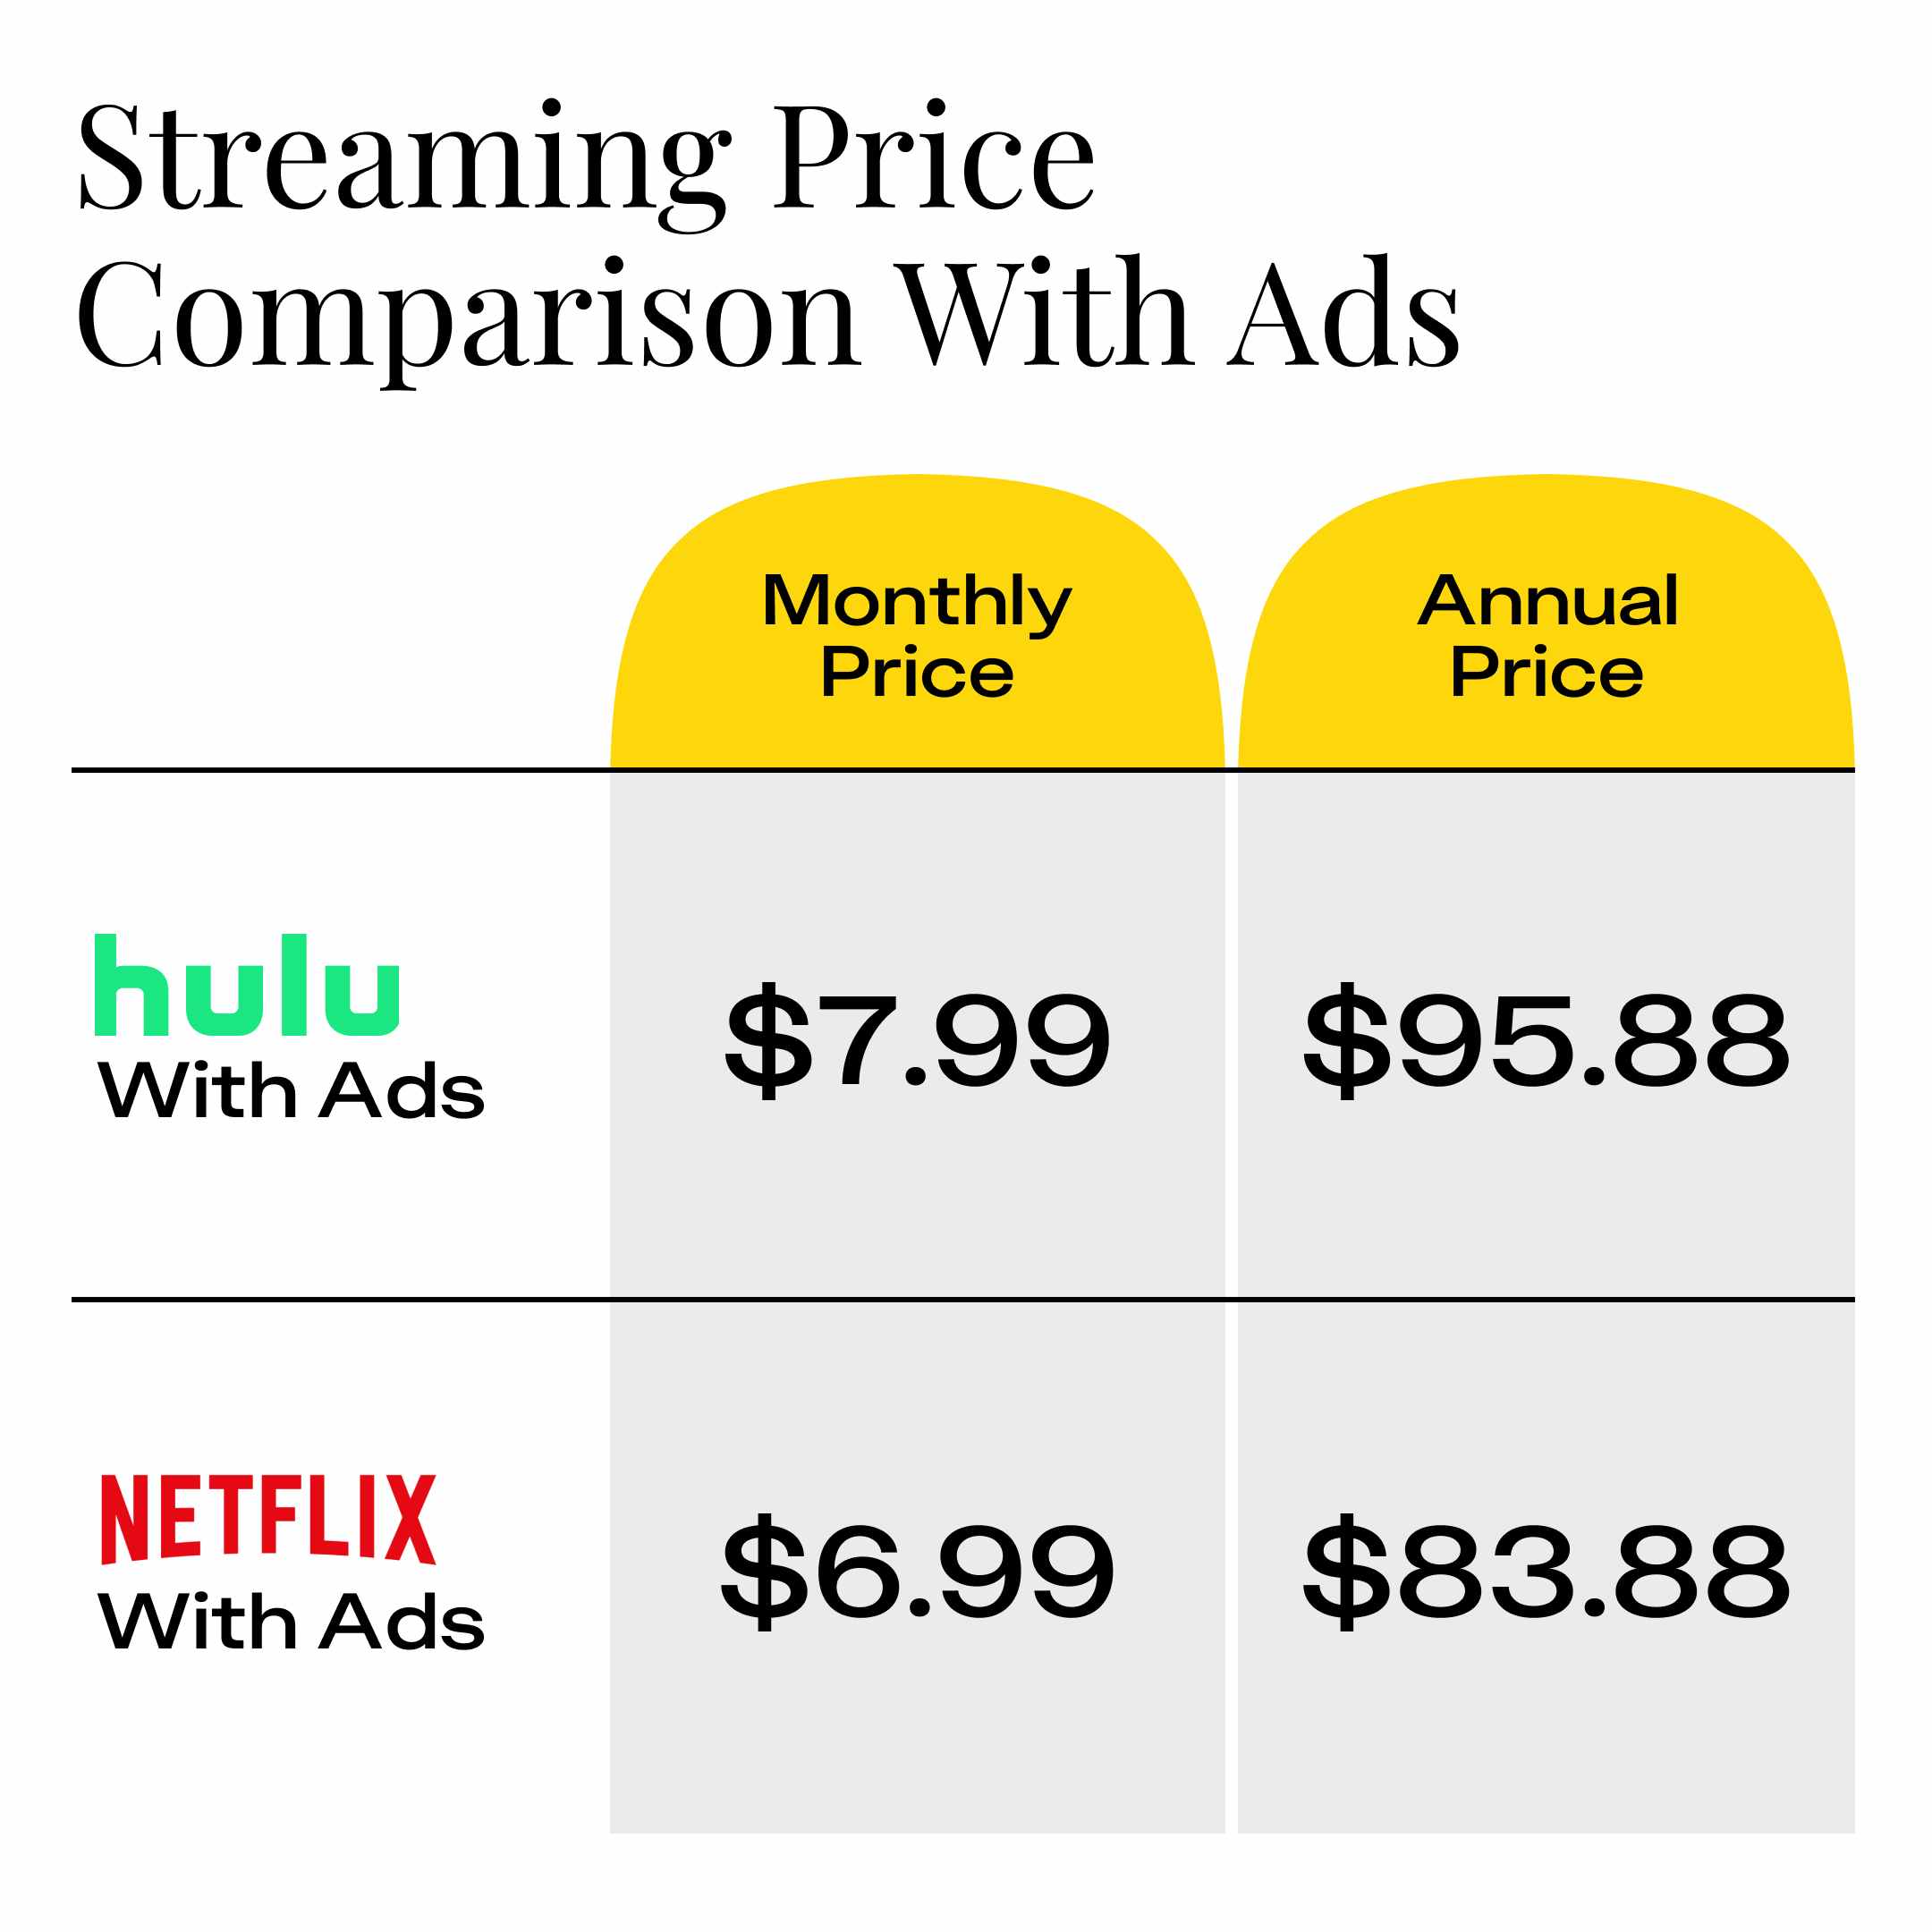 price comparison for streaming service plans with ads from hulu and netflix